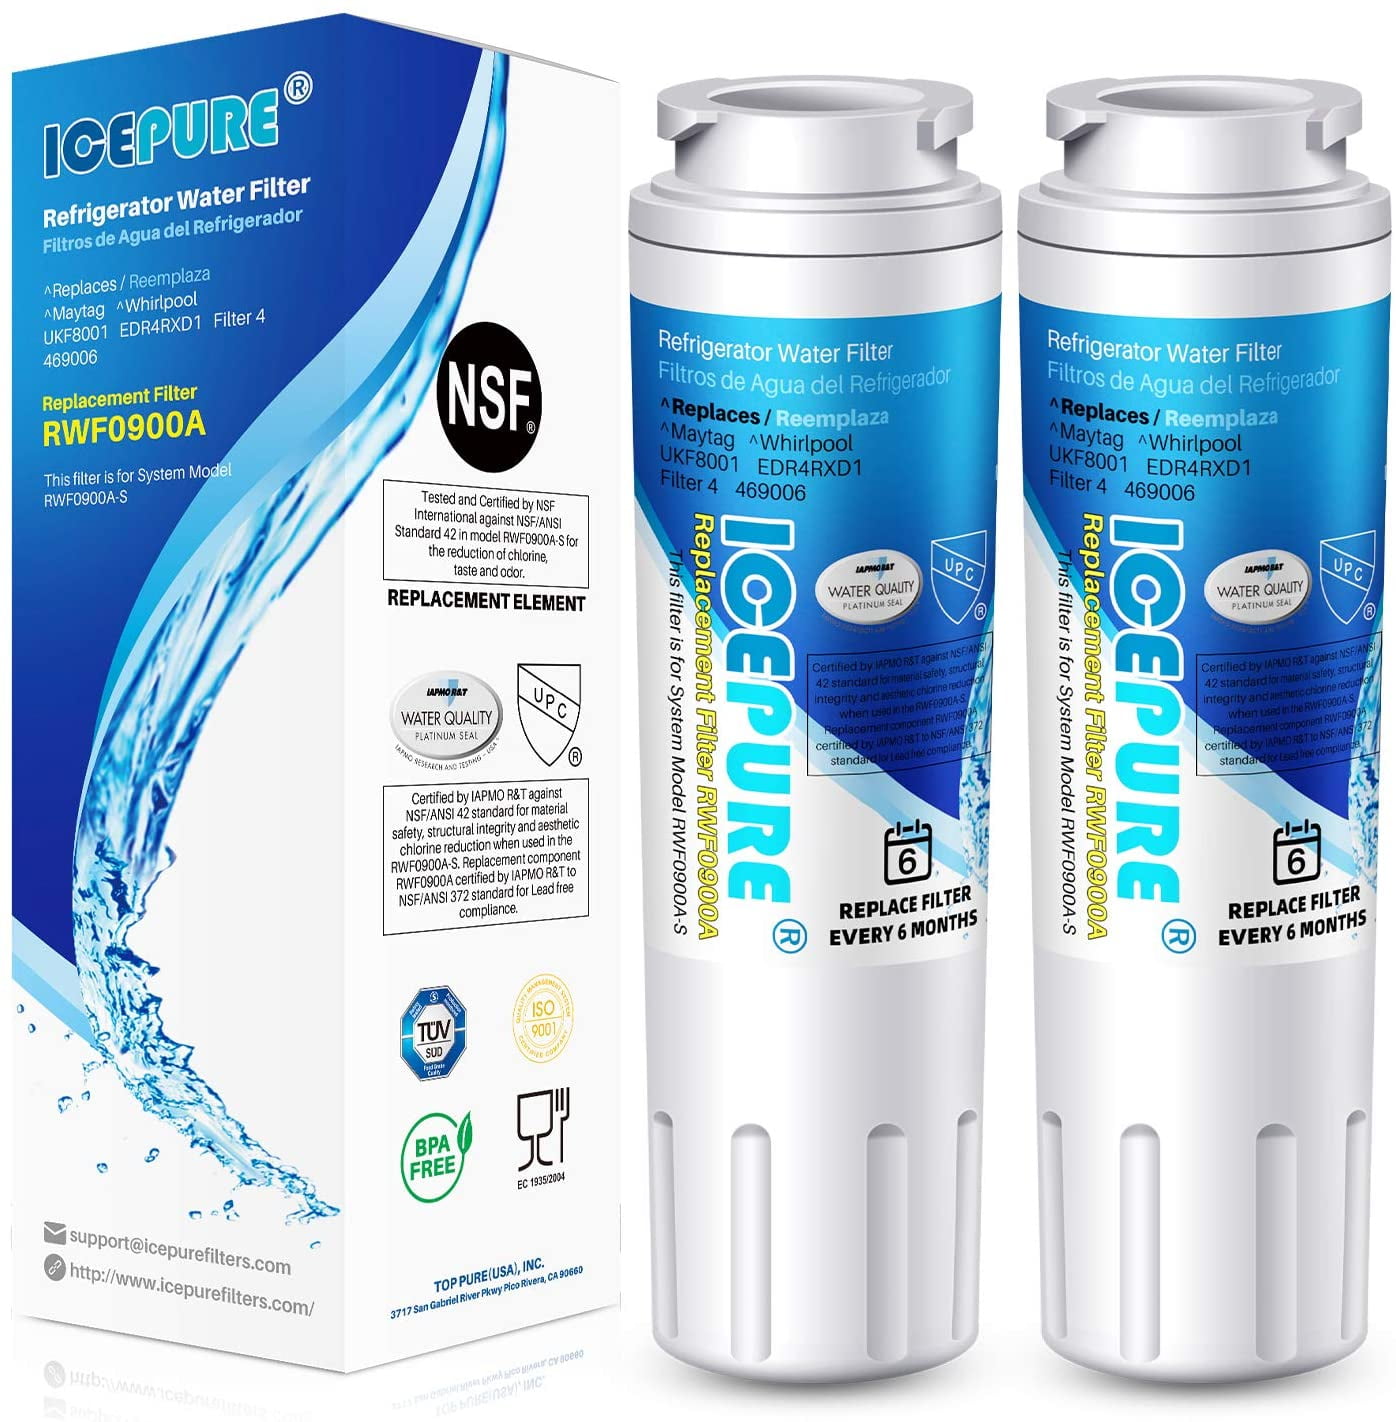 Refresh R-9006 Replacement Water Filter for Maytag Ukf8001 - 2 Pack